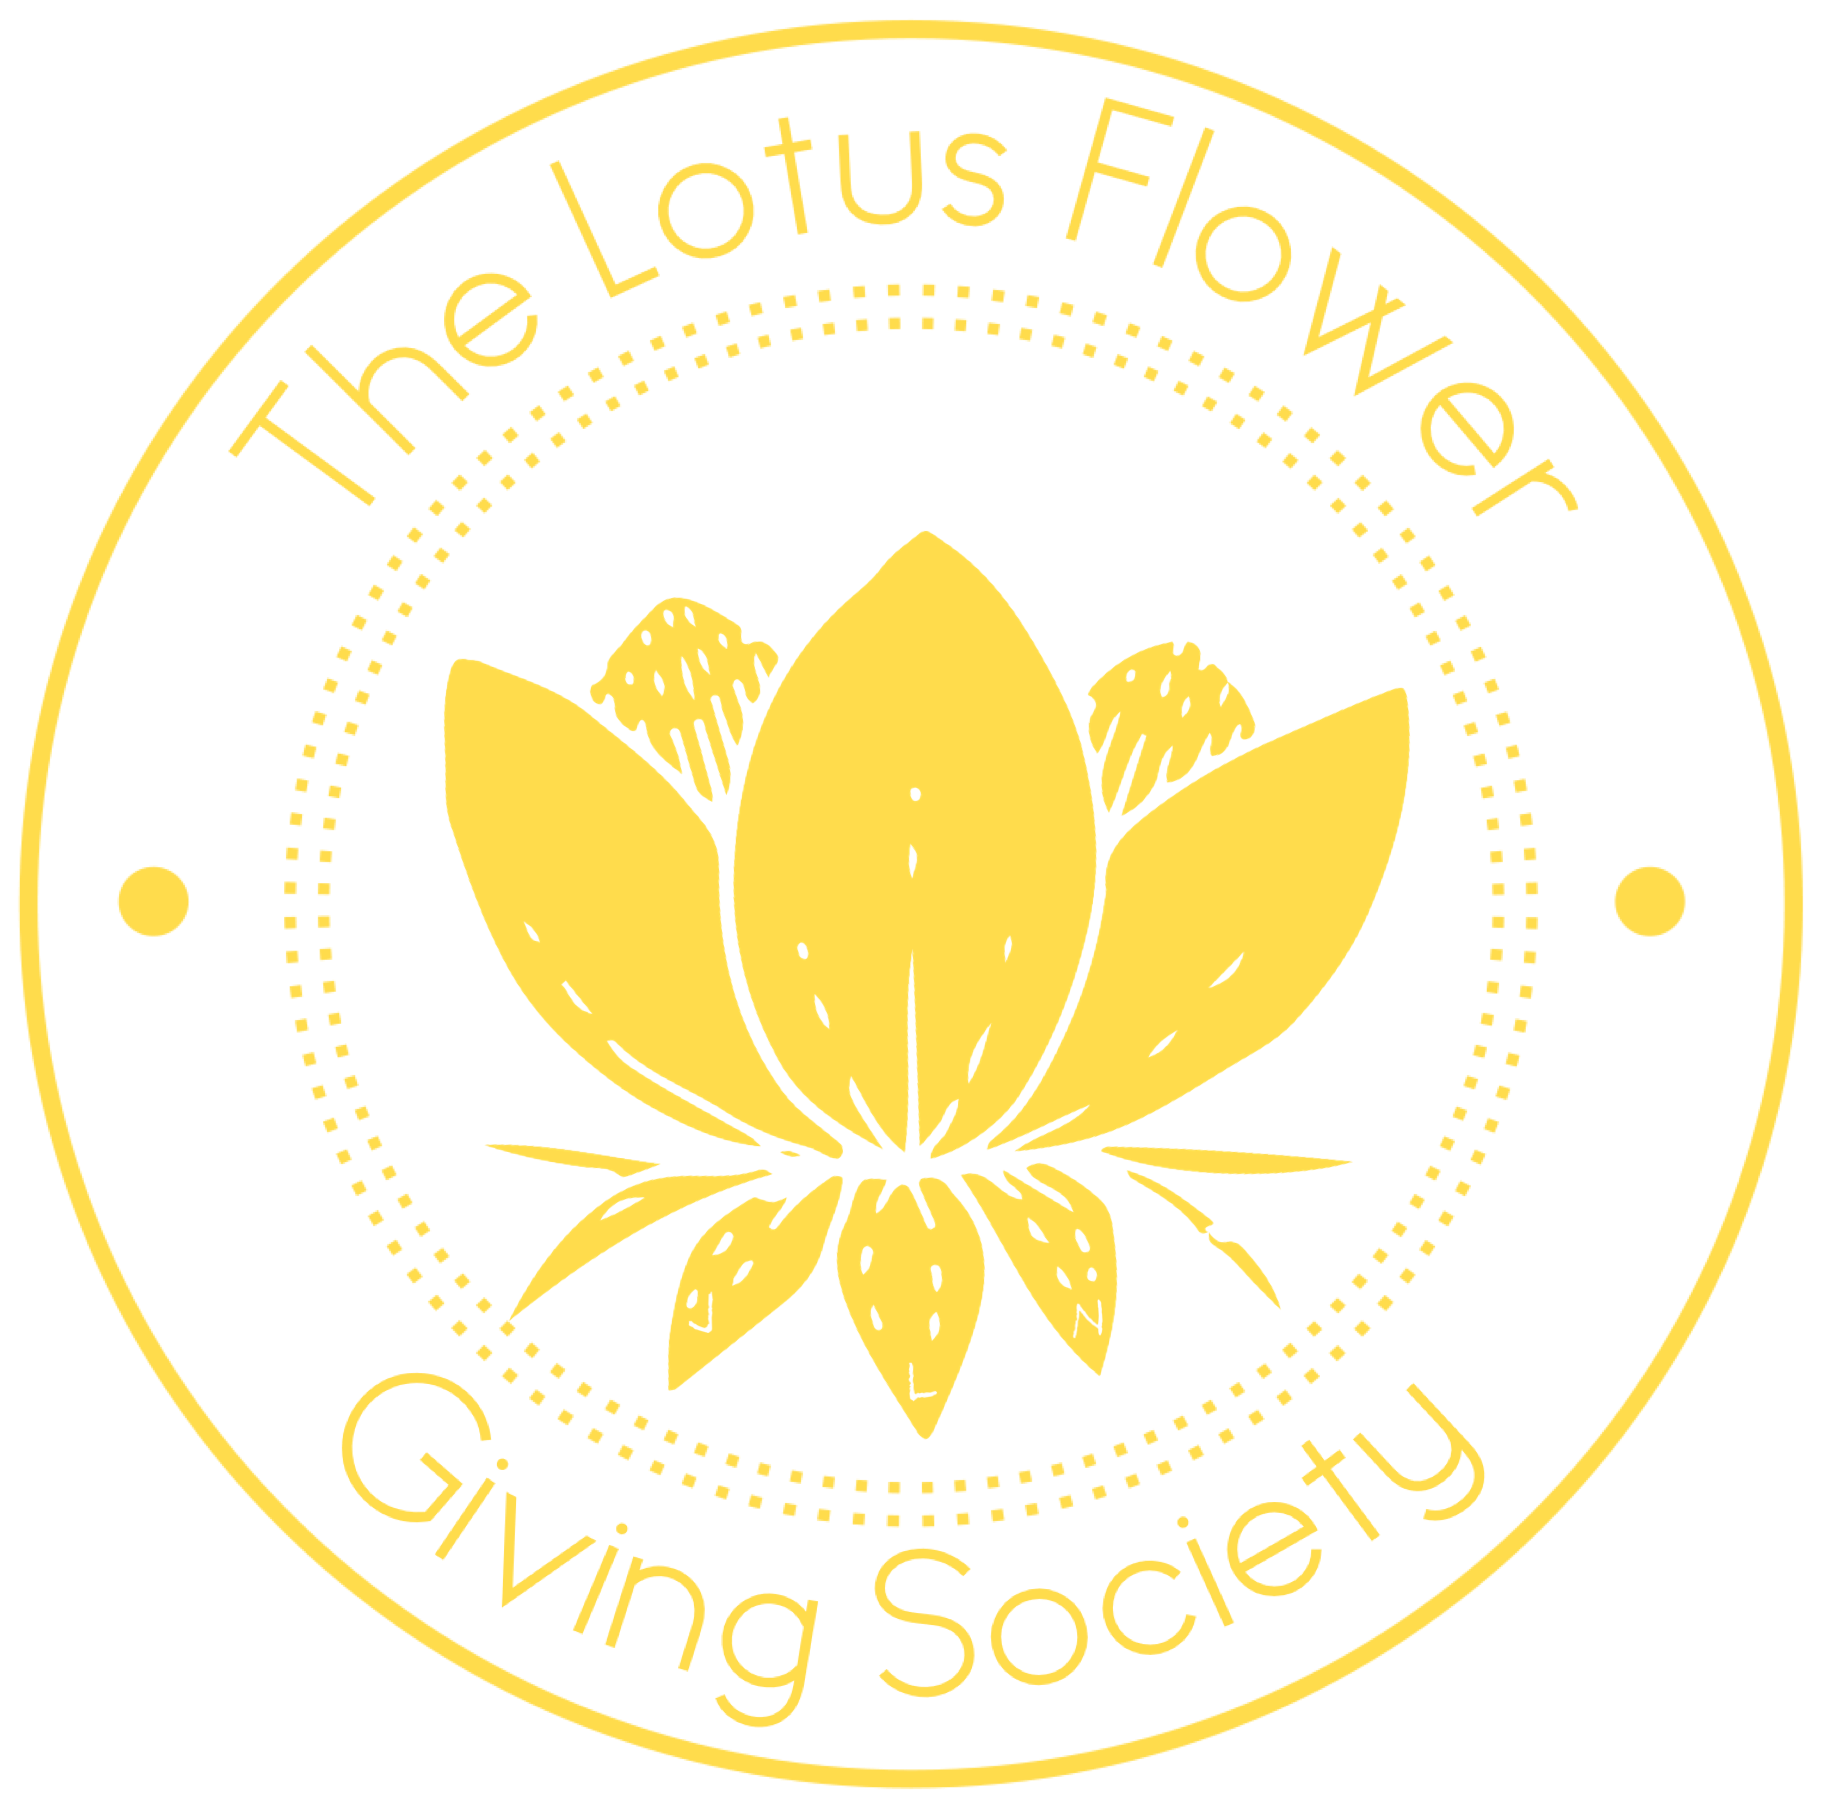 The Lotus Flower Giving Society